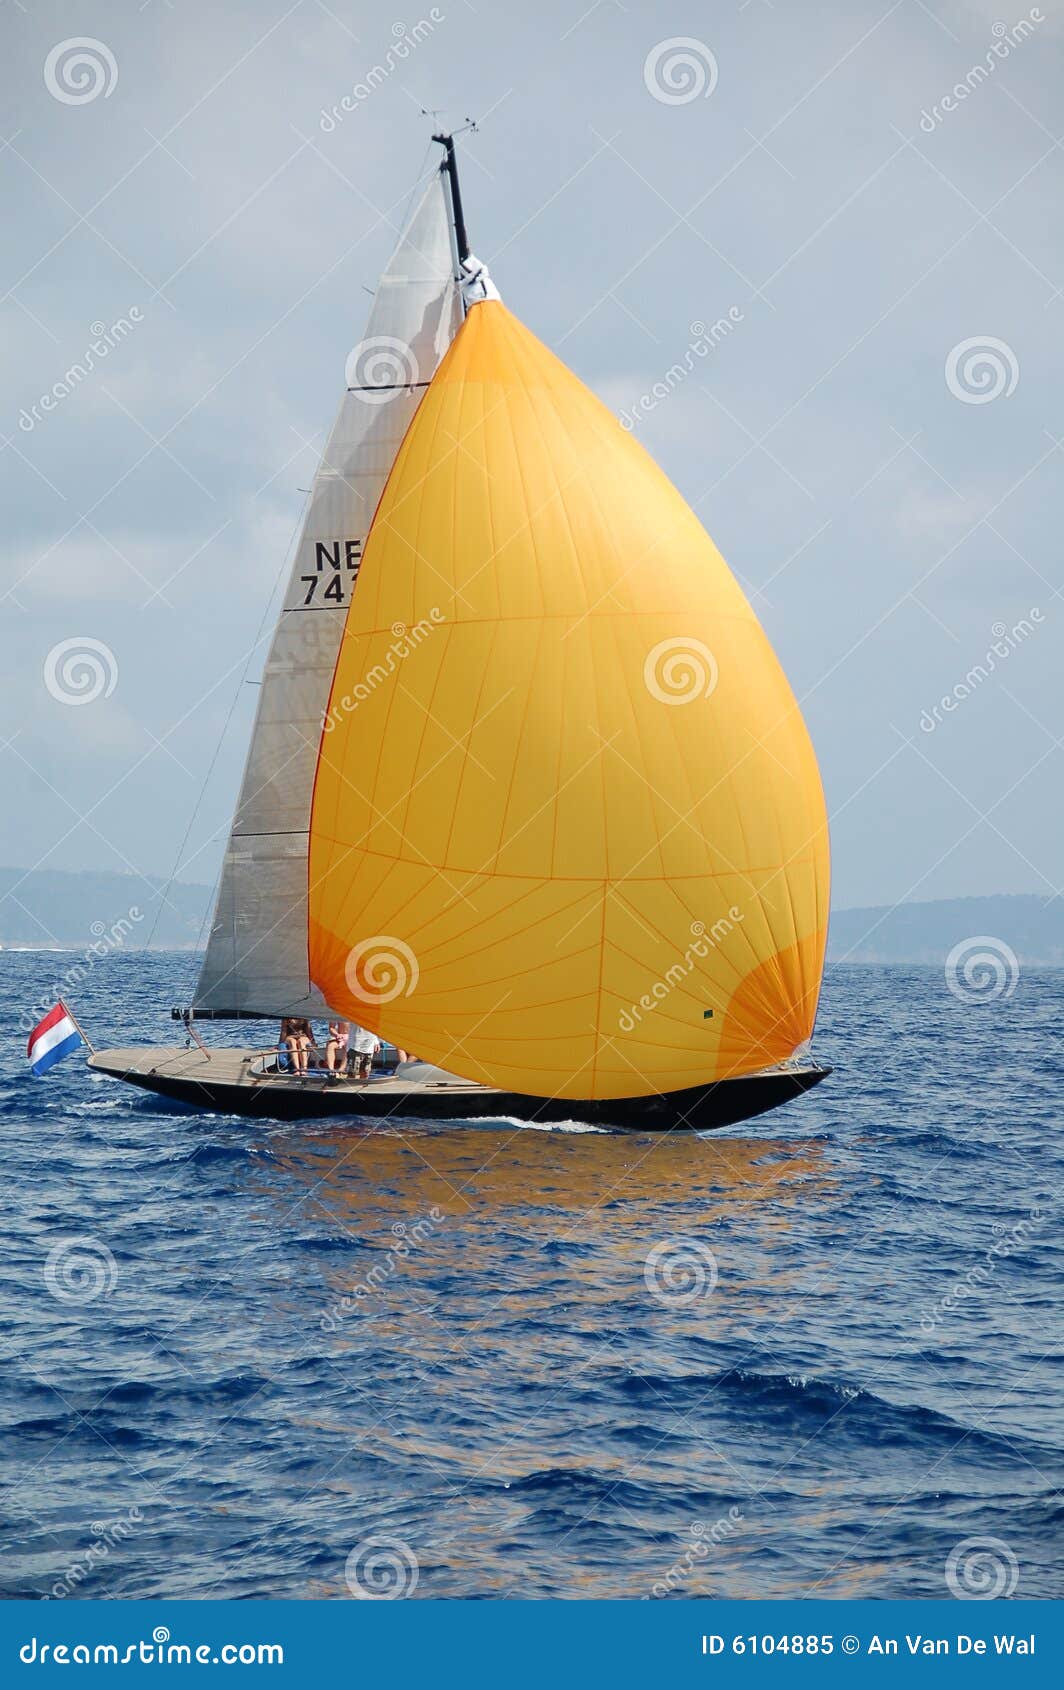 sailboat in french